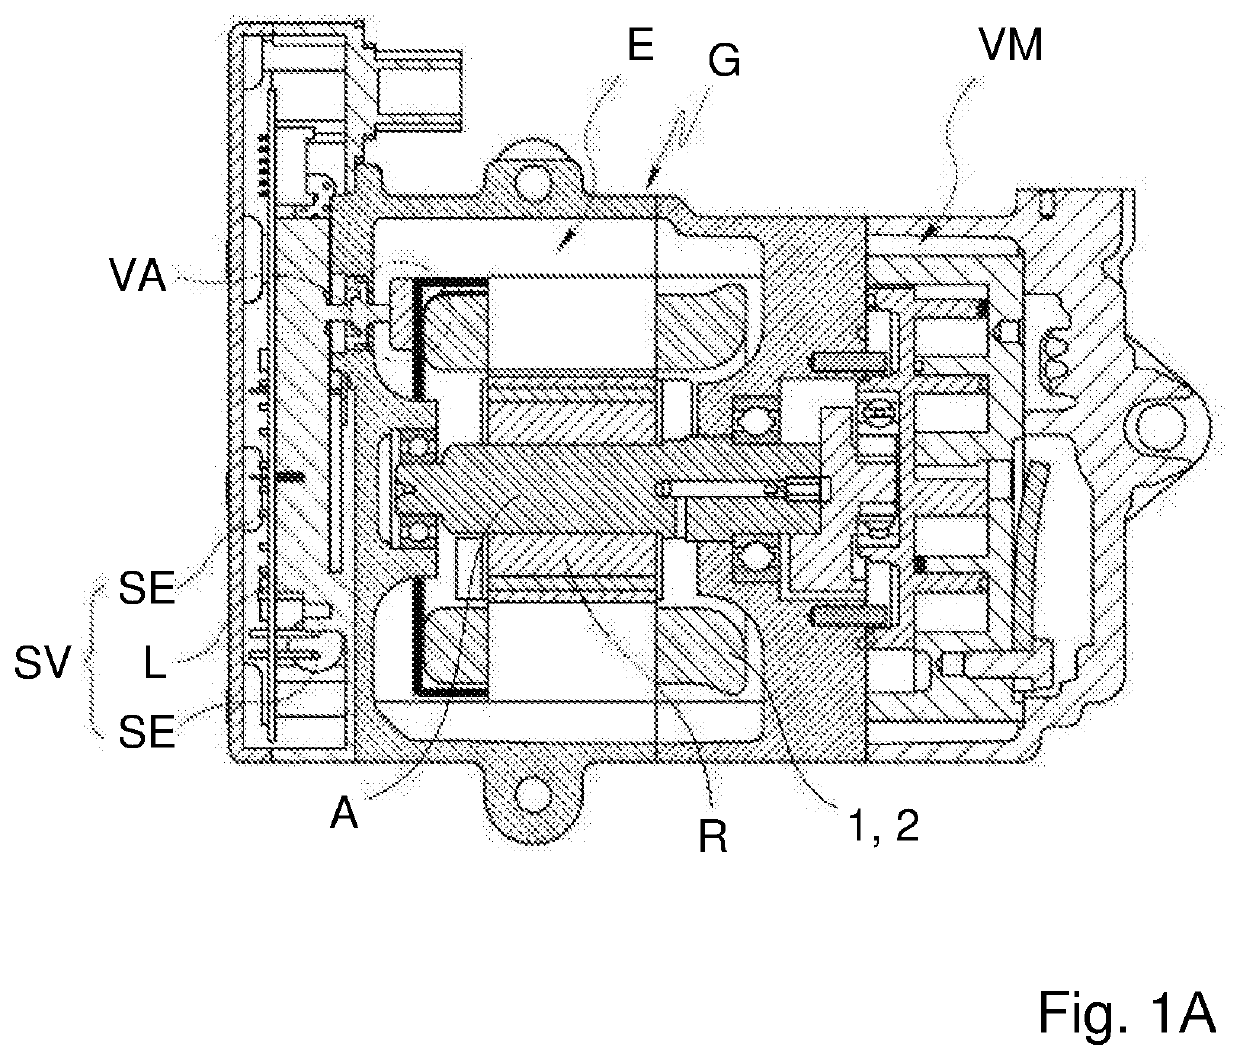 Device for driving a compressor and method for assembling the device